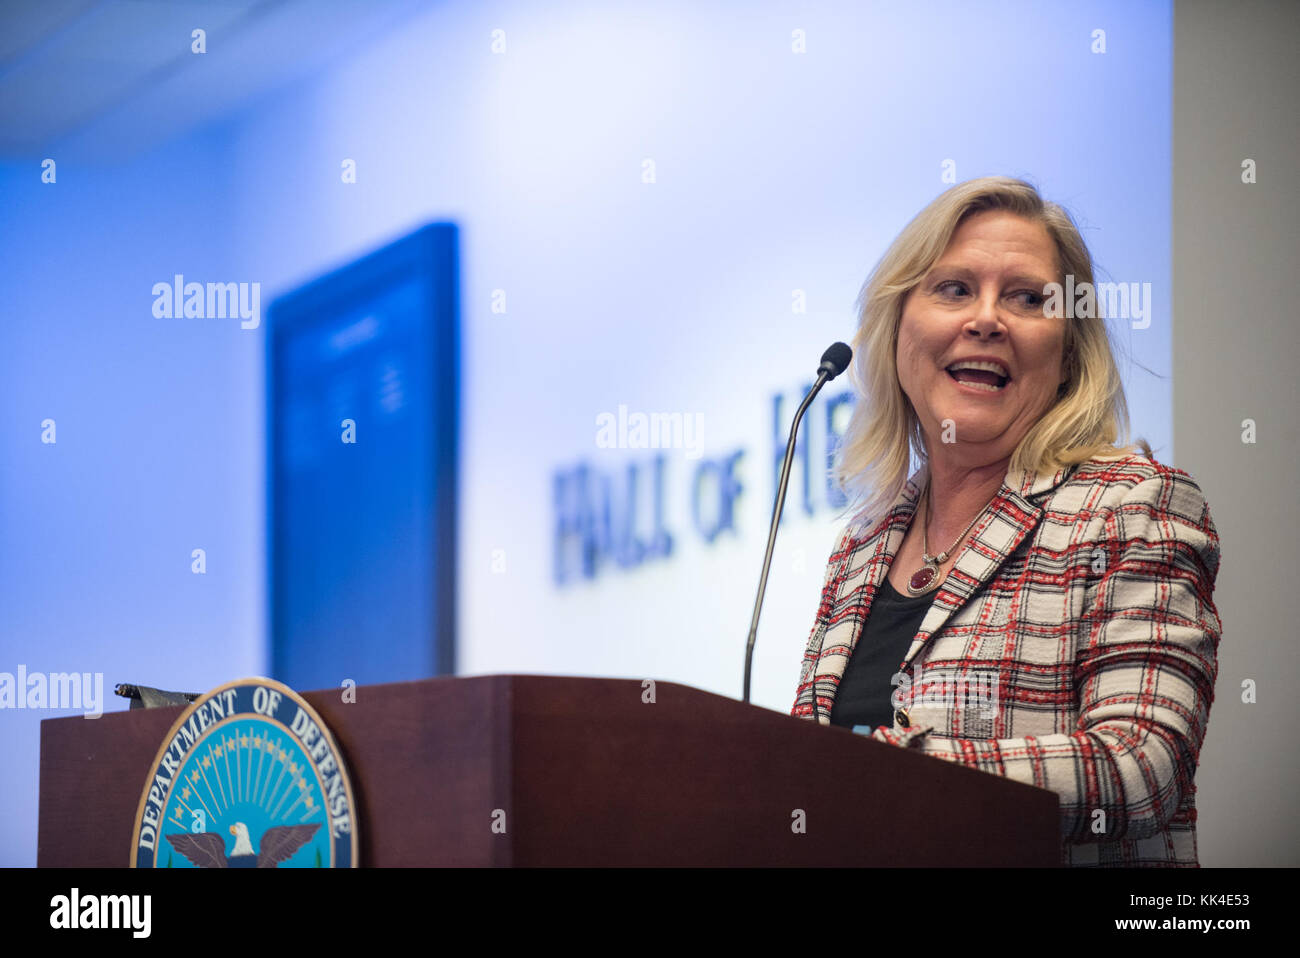 Suzie Schwartz, Trustee of Fisher House Foundation, speaks during the 2017 NewmanÕs Own Awards at the Hall of Heroes in the Pentagon, Oct. 11, 2017. The annual competition seeks to reward ingenuity for programs that benefit service men, women, and their families. To date, the competition has recognized 174 programs with awards totally $1, 725,000. (DoD Photo by U.S. Army Sgt. James K. McCann) Stock Photo